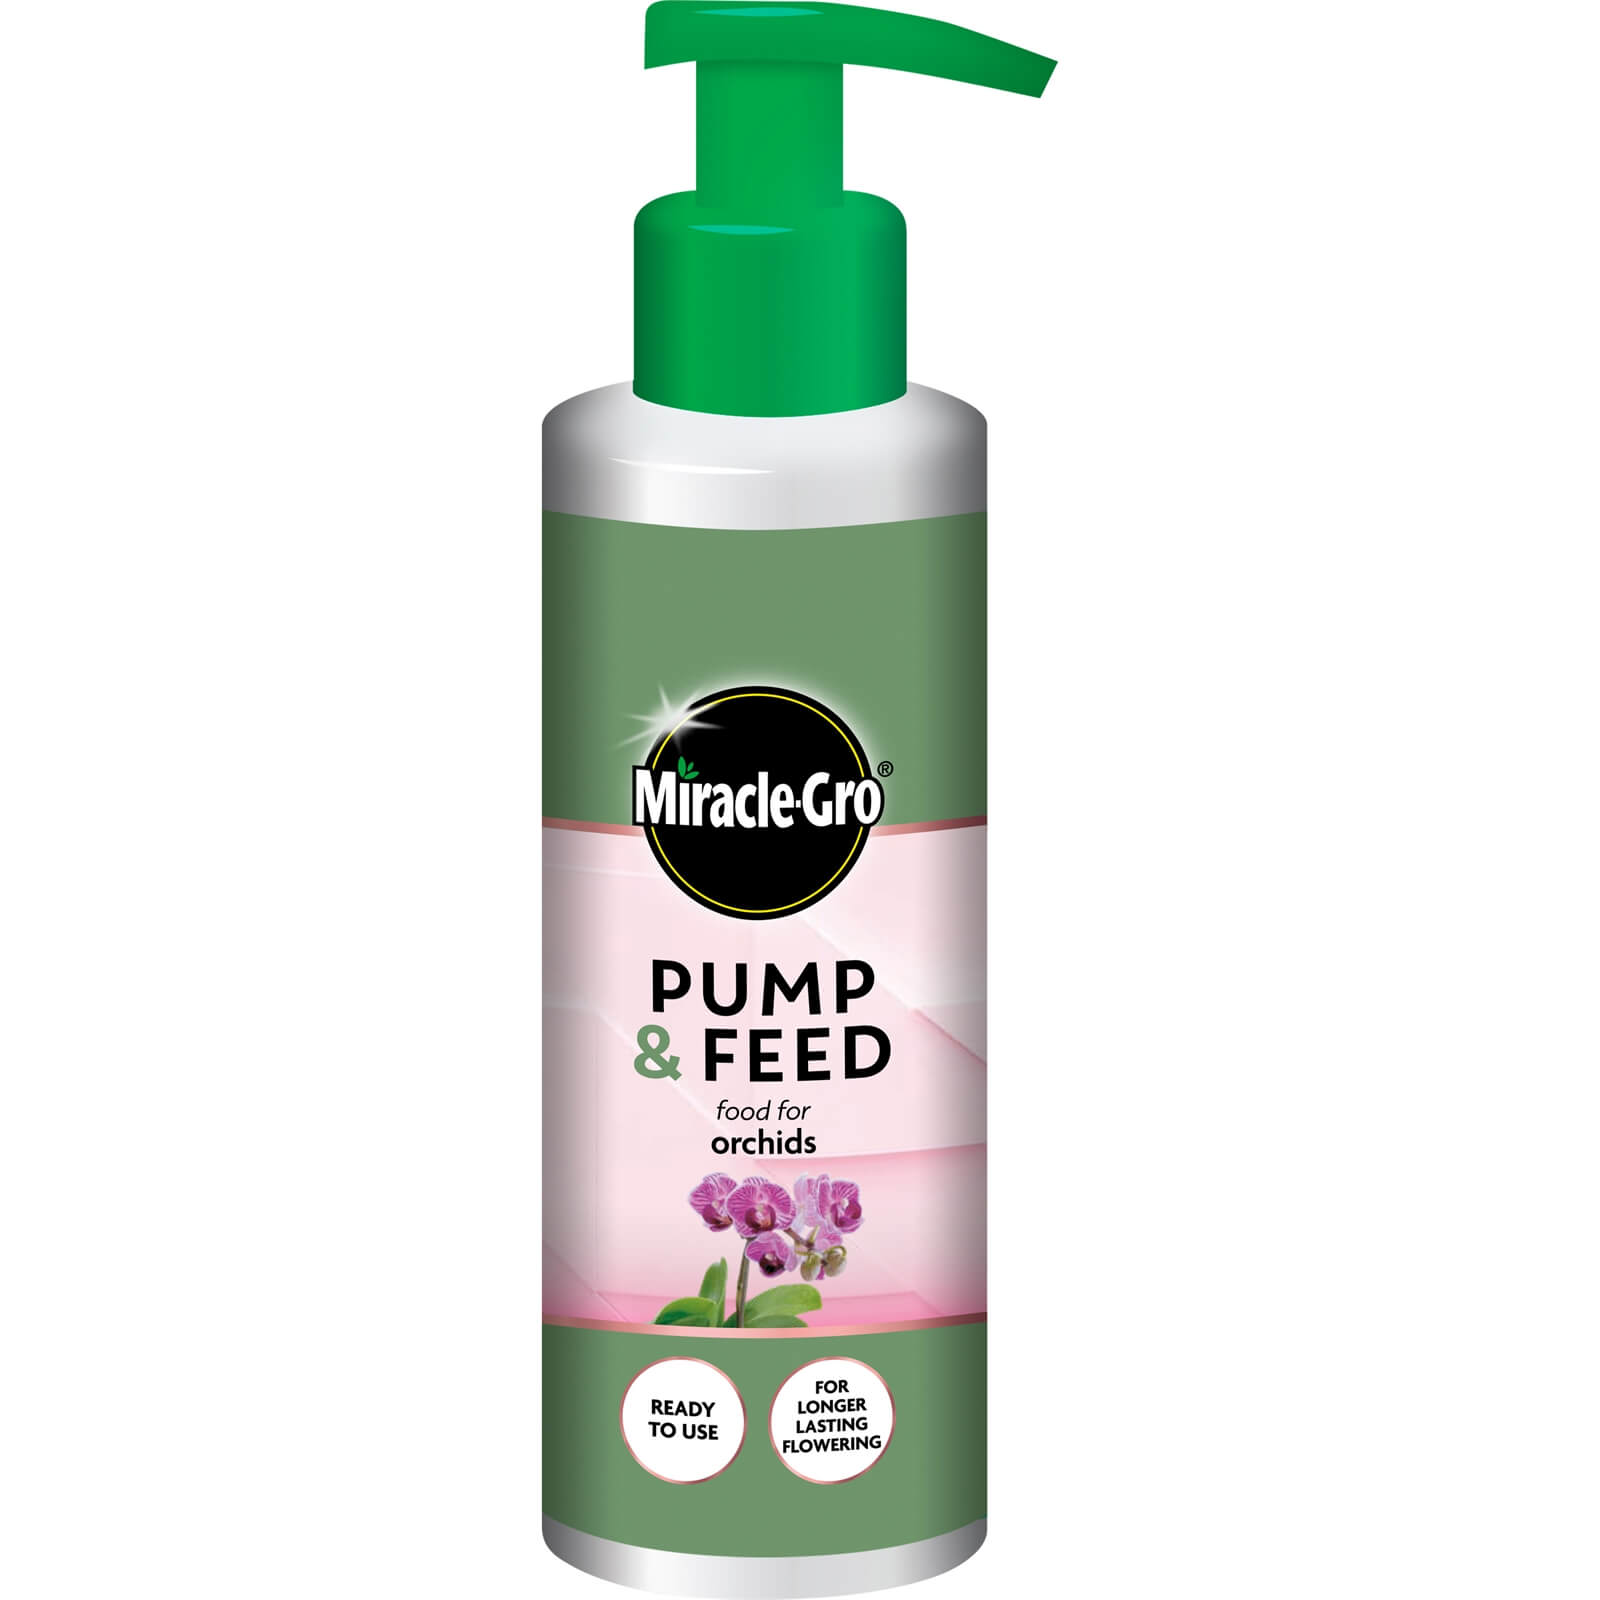 Miracle-Gro Pump & Feed Orchid Food - 200ml